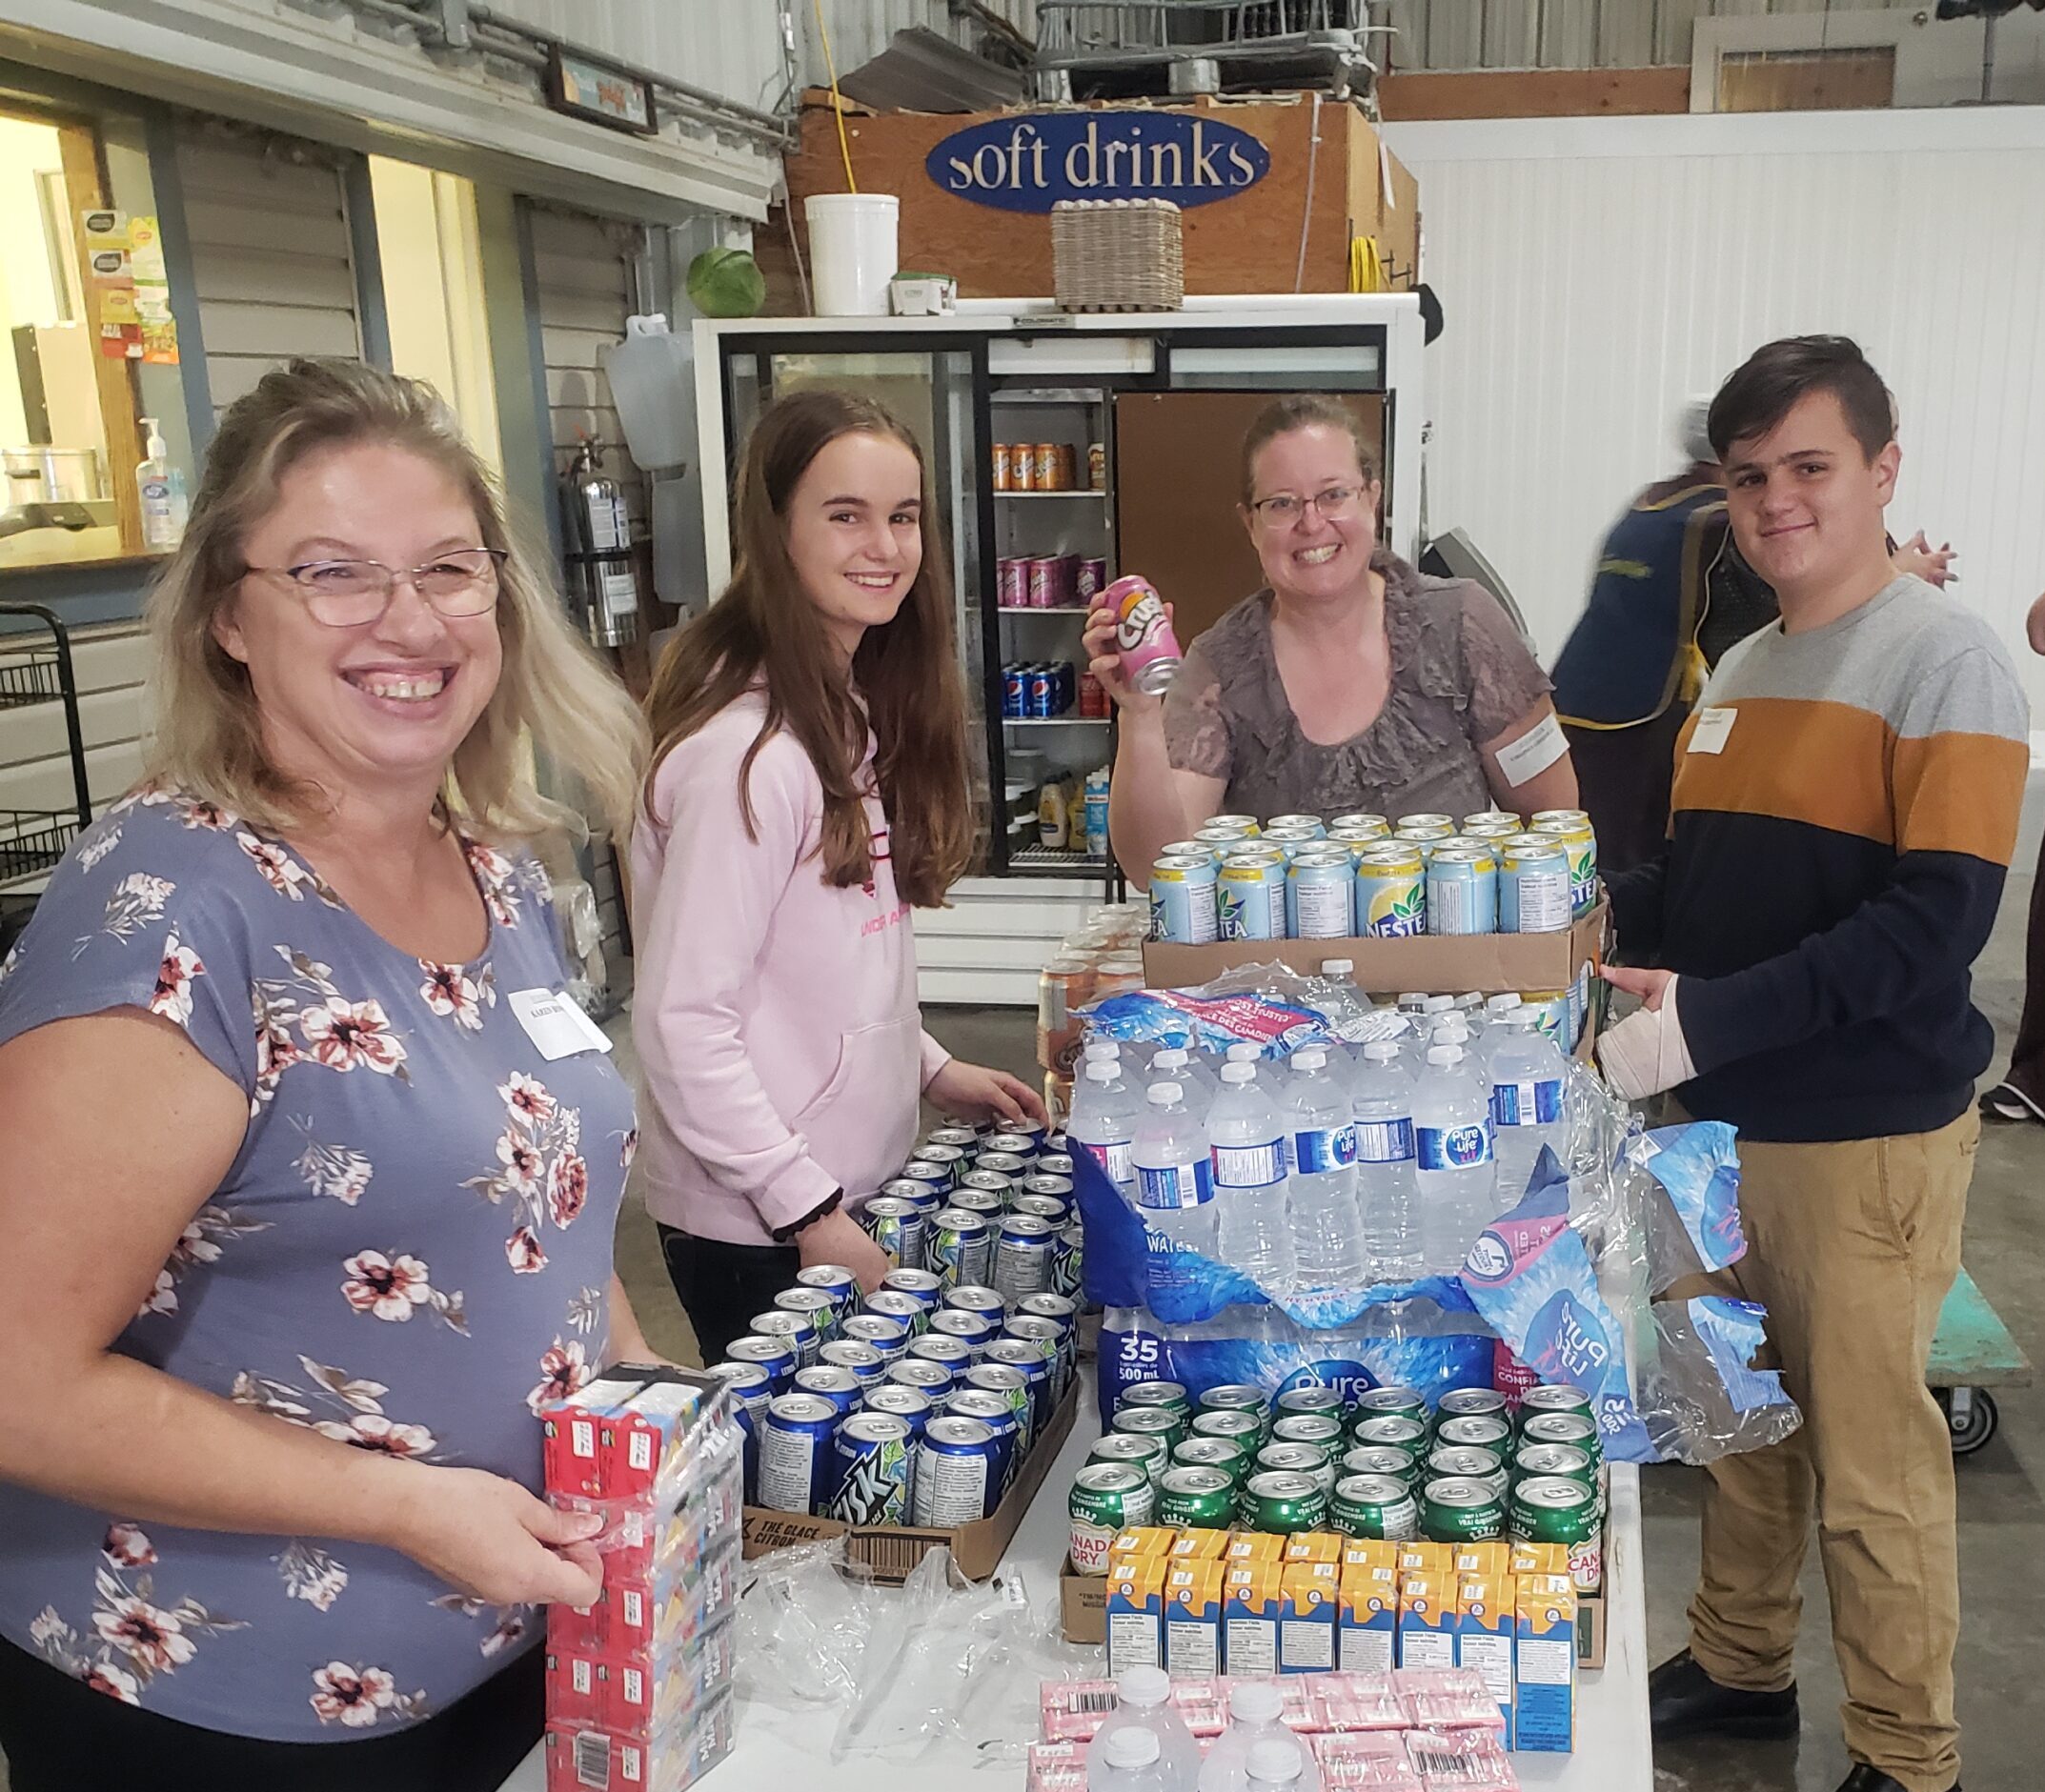 Four individuals are standing behind a table with stacks of canned soft drinks. They are smiling at the camera, possibly during a group activity or volunteering event.